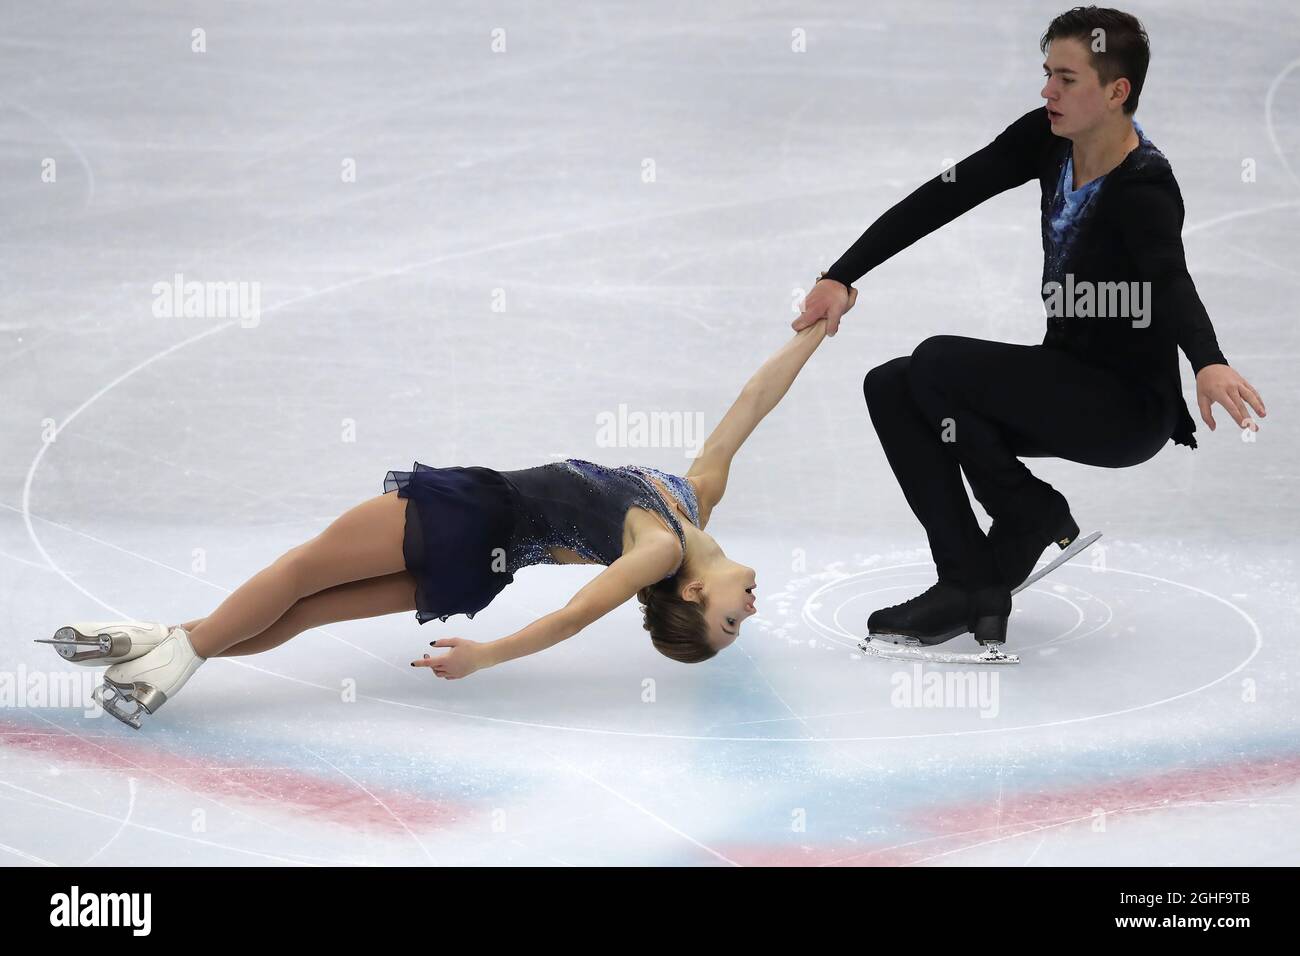 Daria Pavliuchenko and Denis Khodykin of Russia perform at Palavela, Turin. Picture date: 5th December 2019. Picture credit should read: Jonathan Moscrop/Sportimage via PA Images Stock Photo